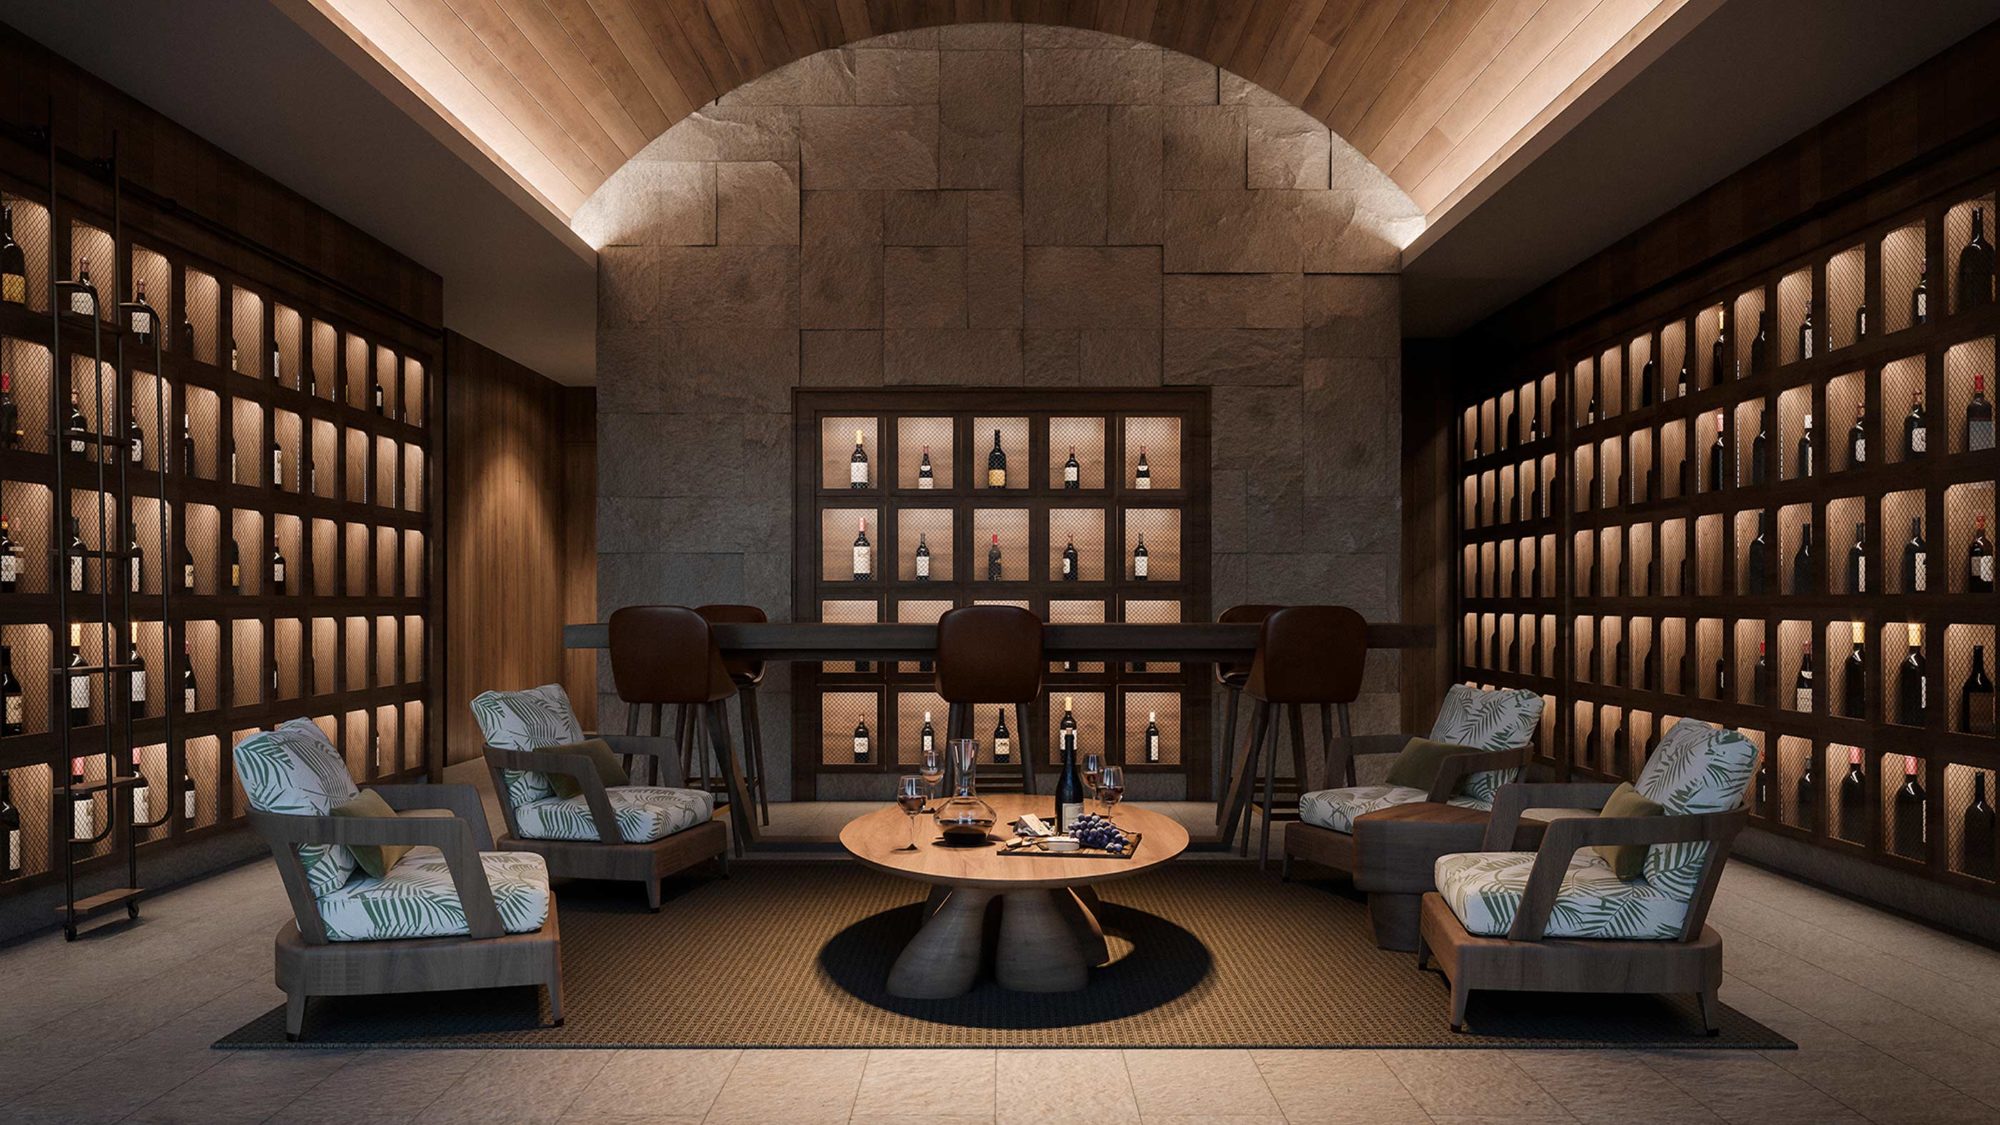 Wine room with lounge seating and bottle displayed on the walls